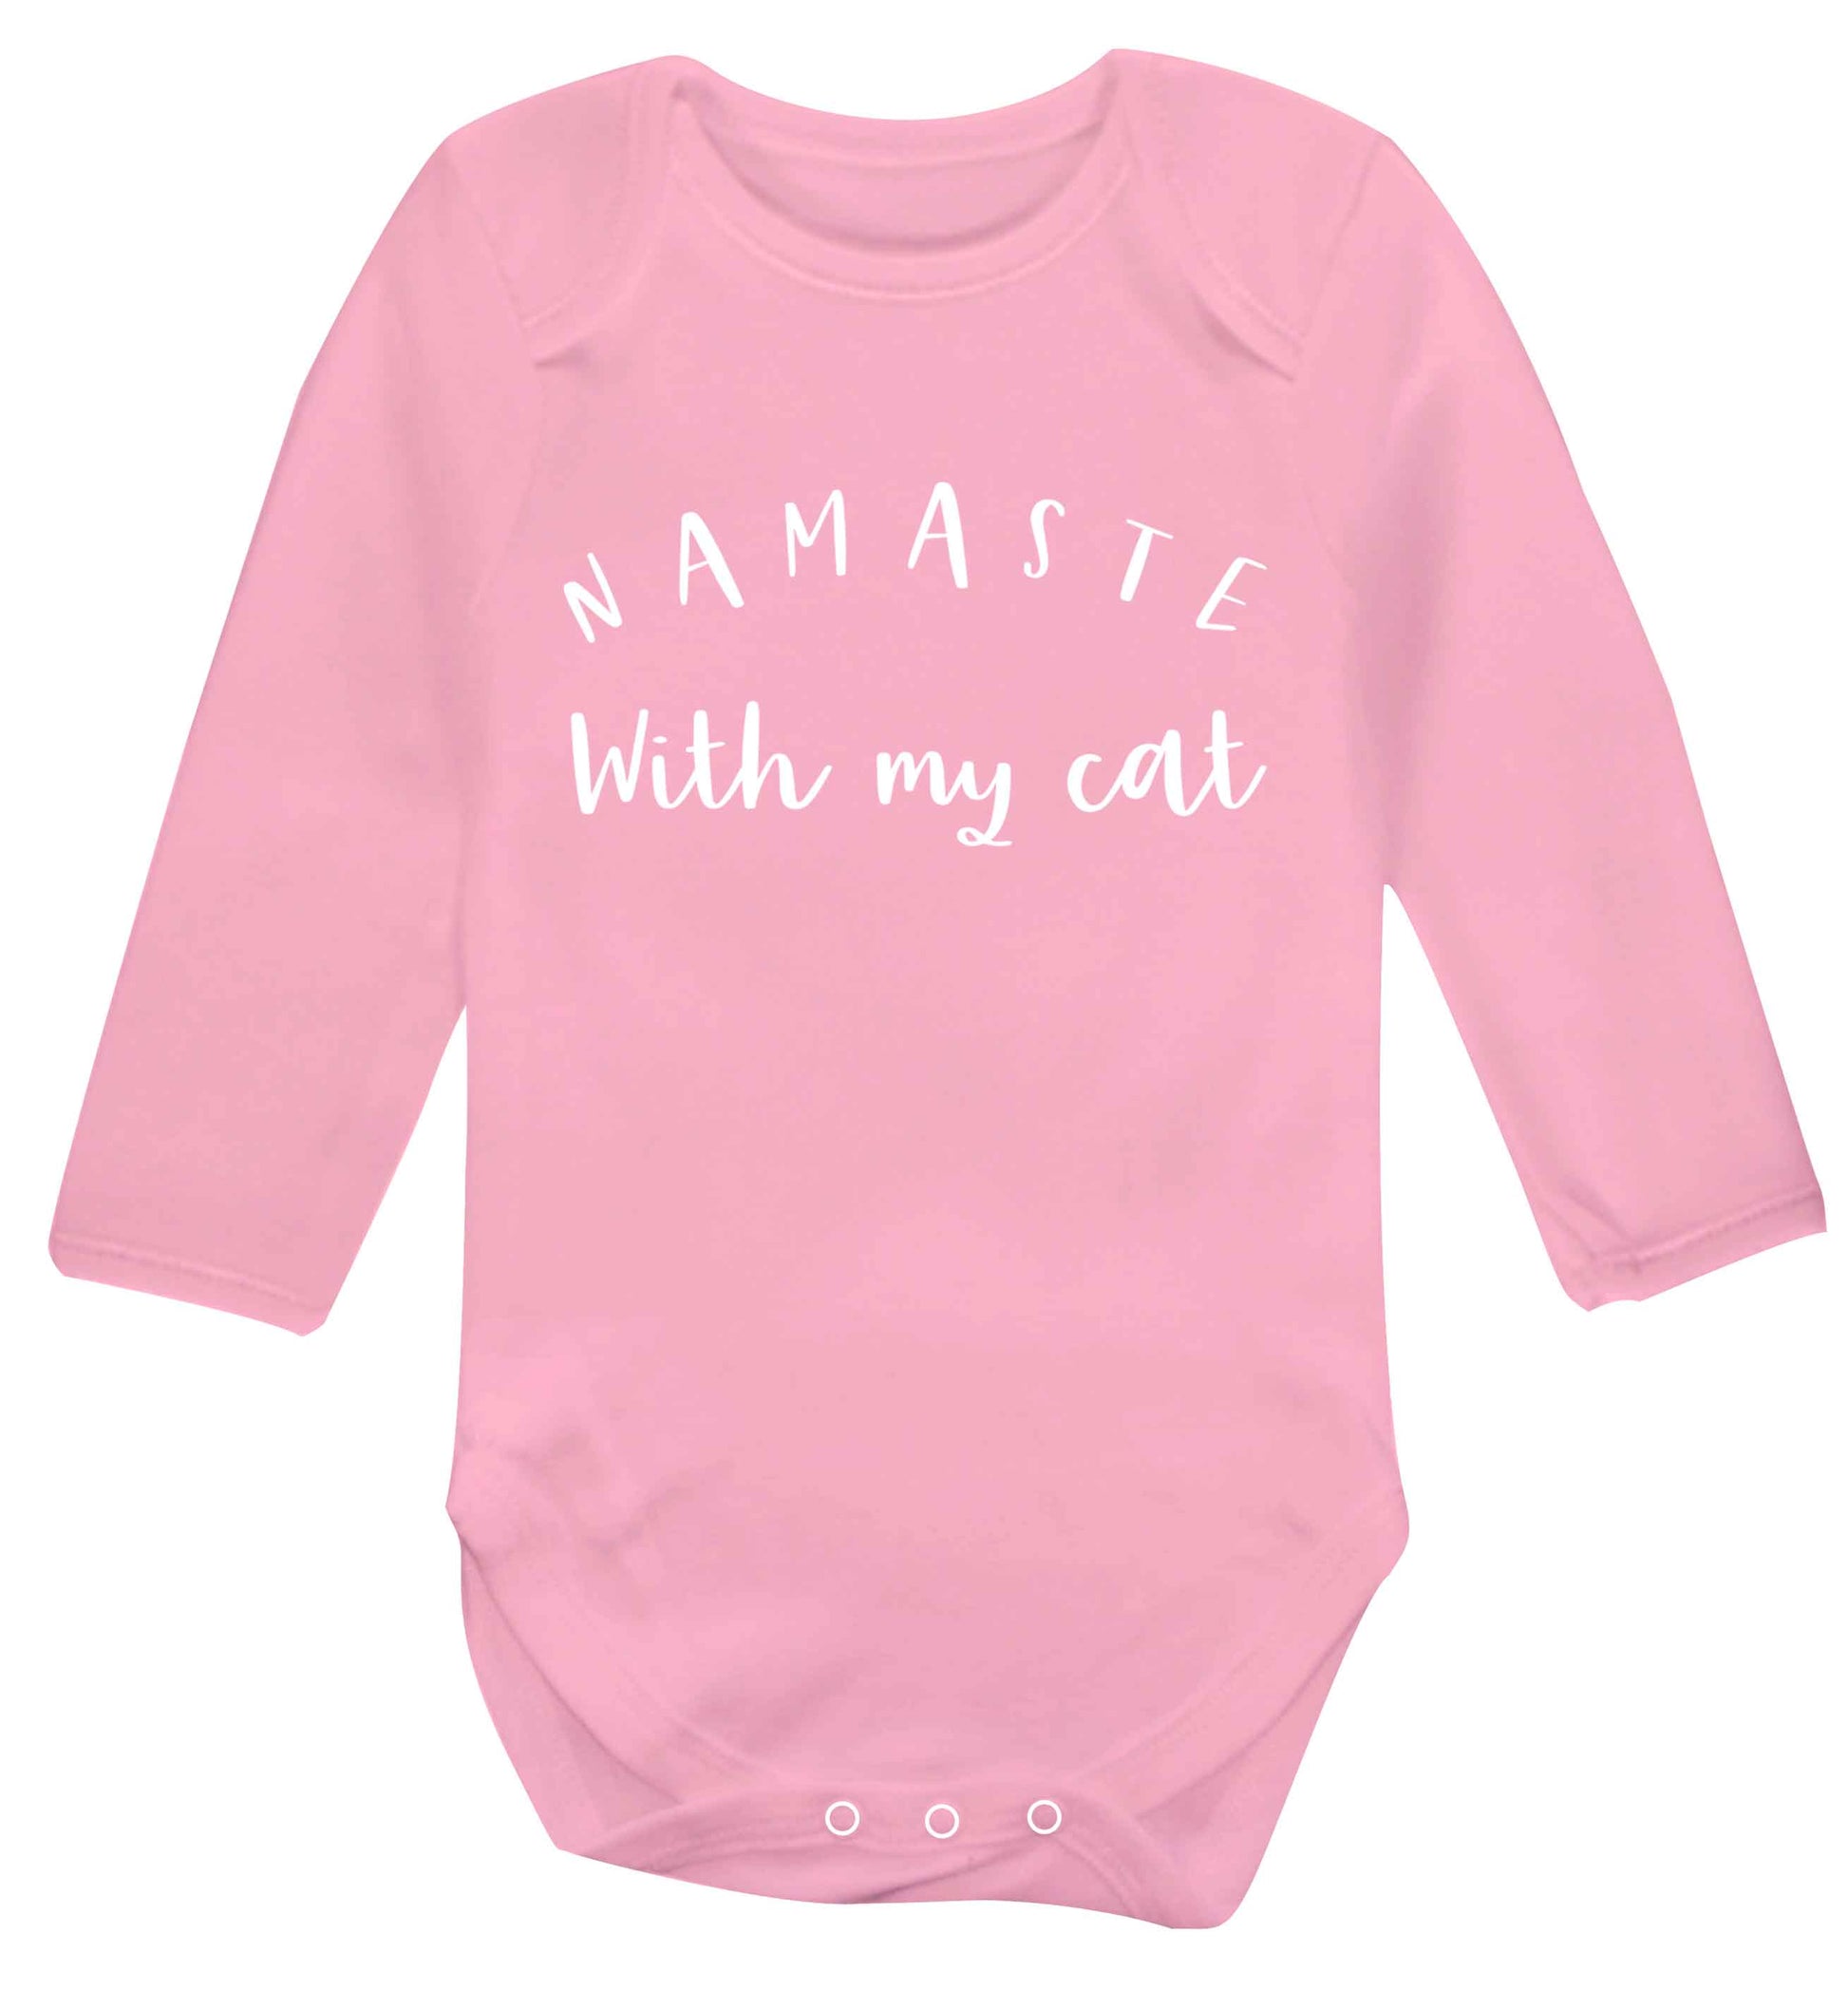 Namaste with my cat Baby Vest long sleeved pale pink 6-12 months